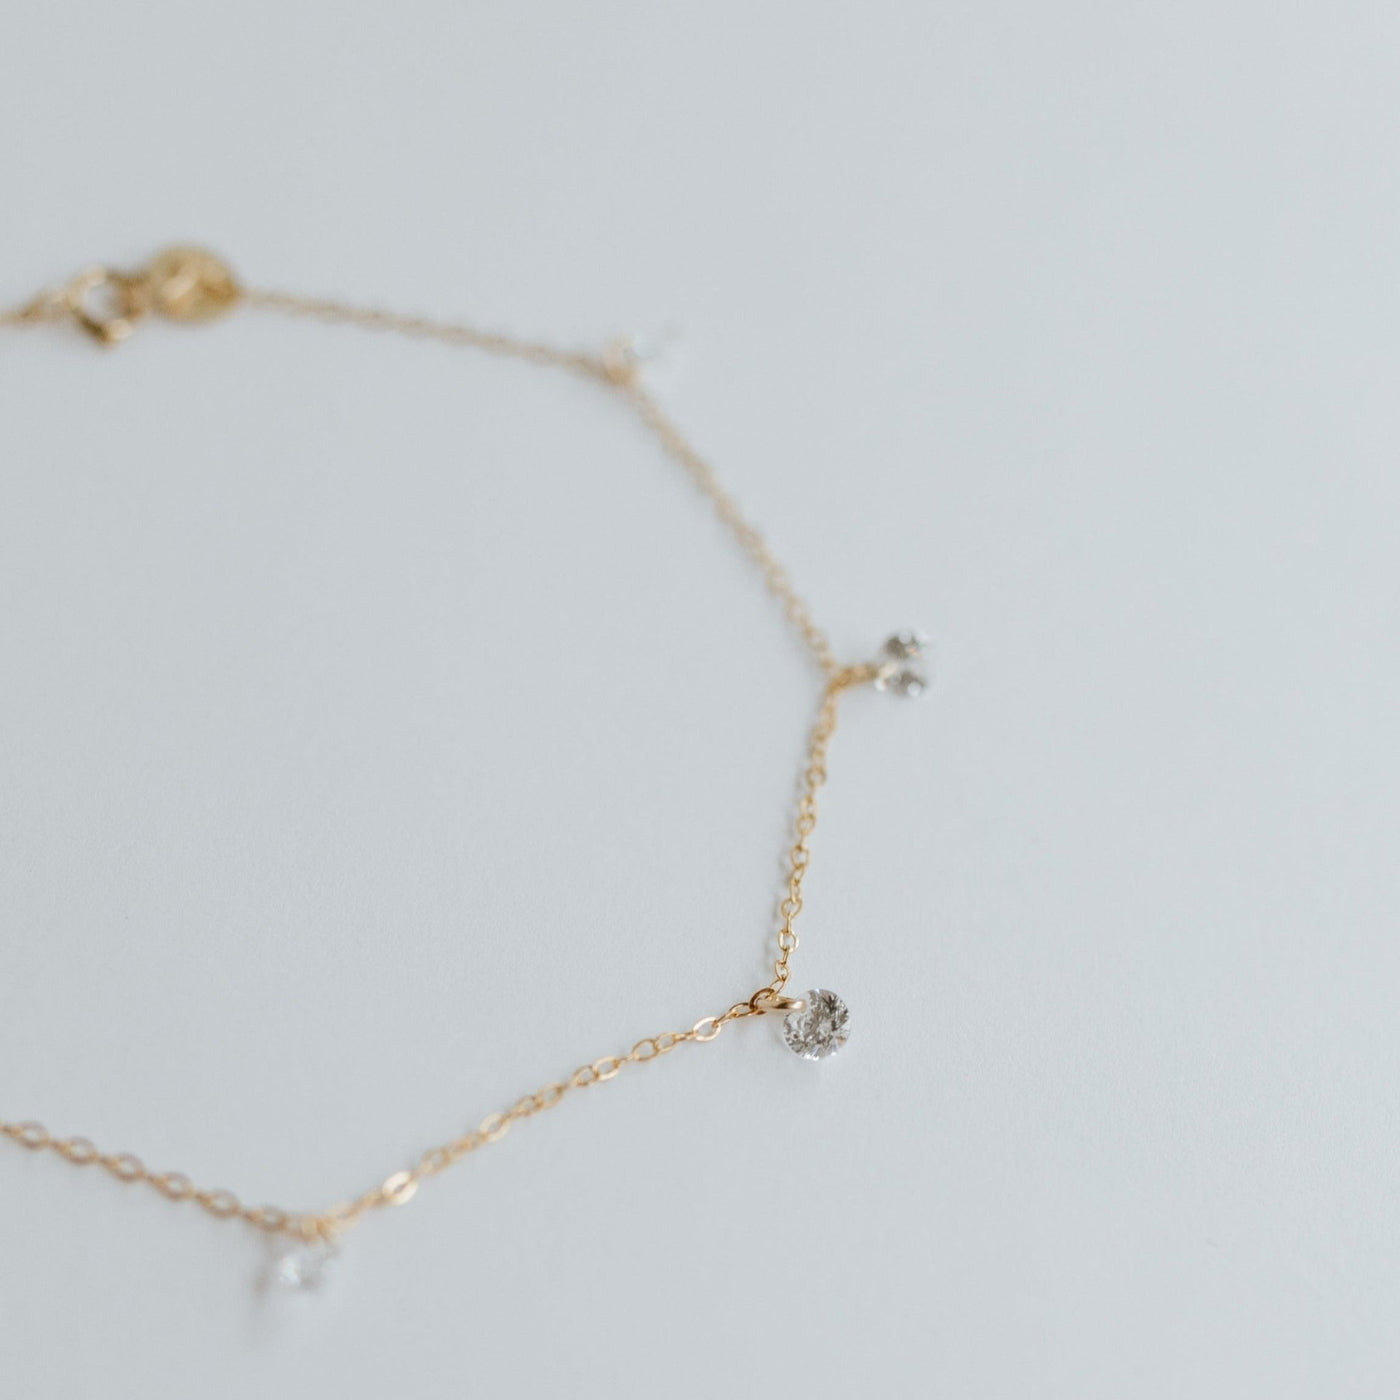 Grove Anklet - Jillian Leigh Jewellery - anklets